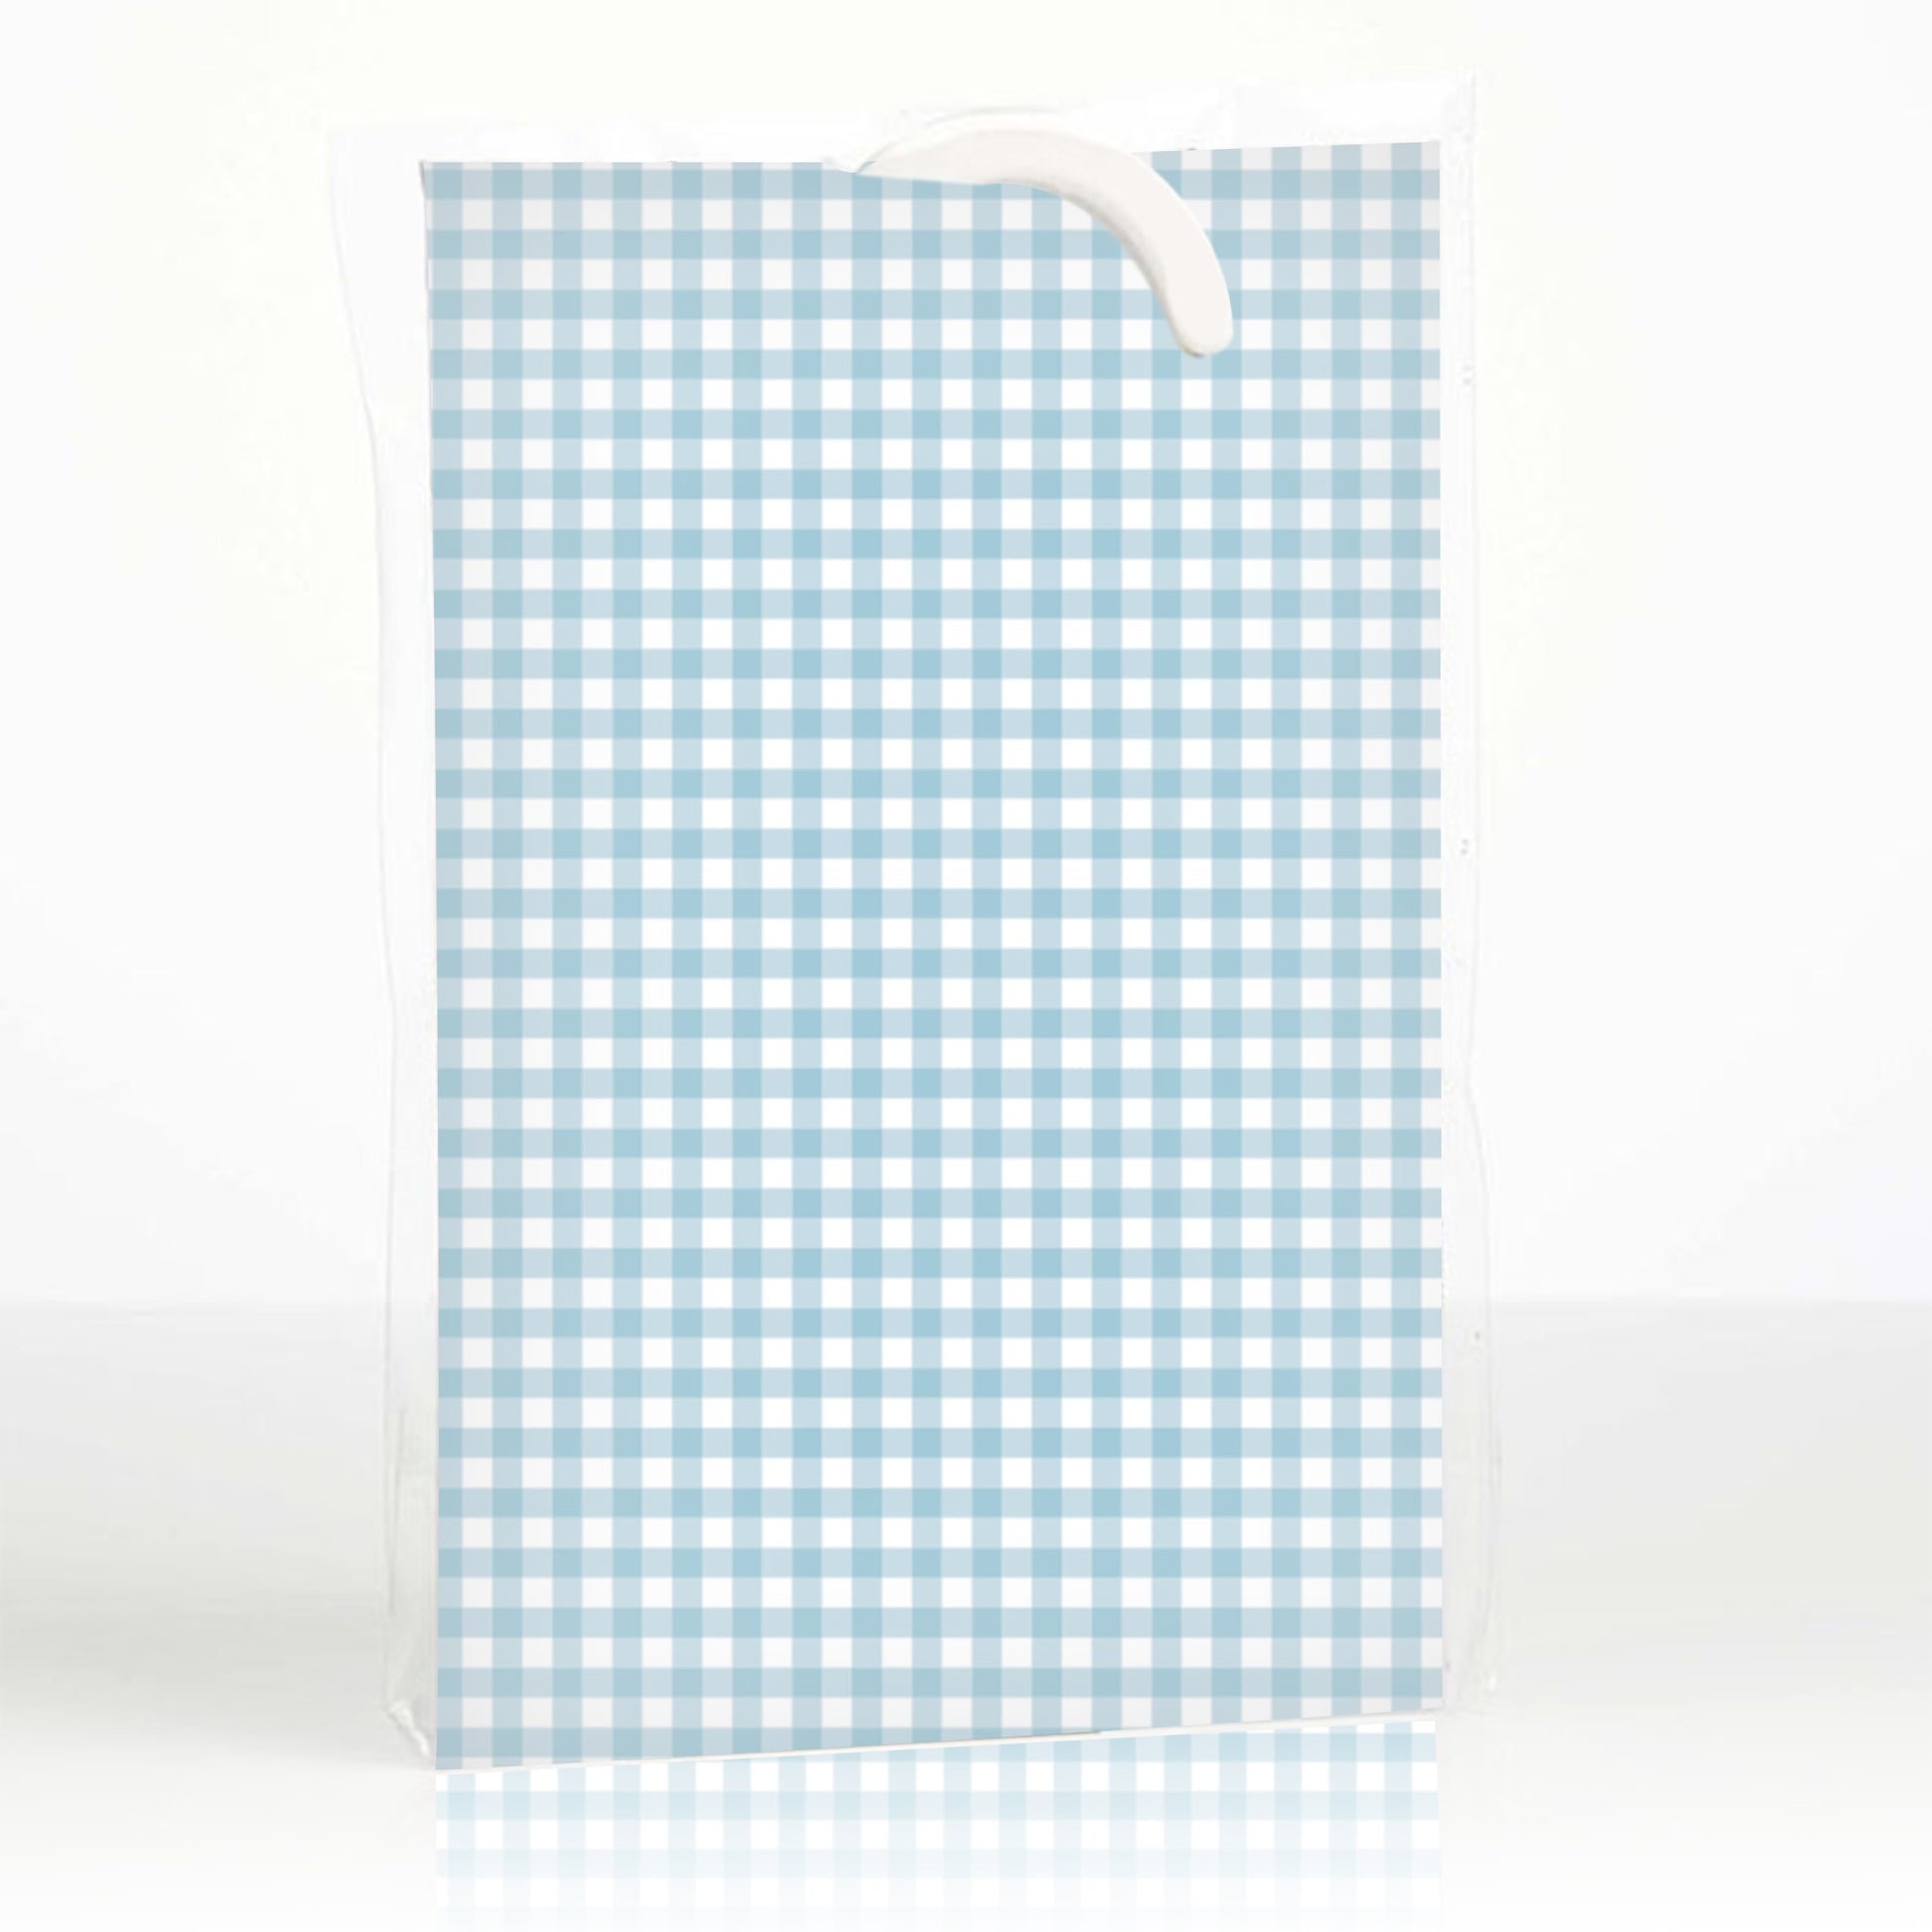 SIMPLY DRAWER LINERS | FRESH LINEN SCENTED Wardrobe Freshener in a GINGHAM Pattern in DUCK EGG BLUE.